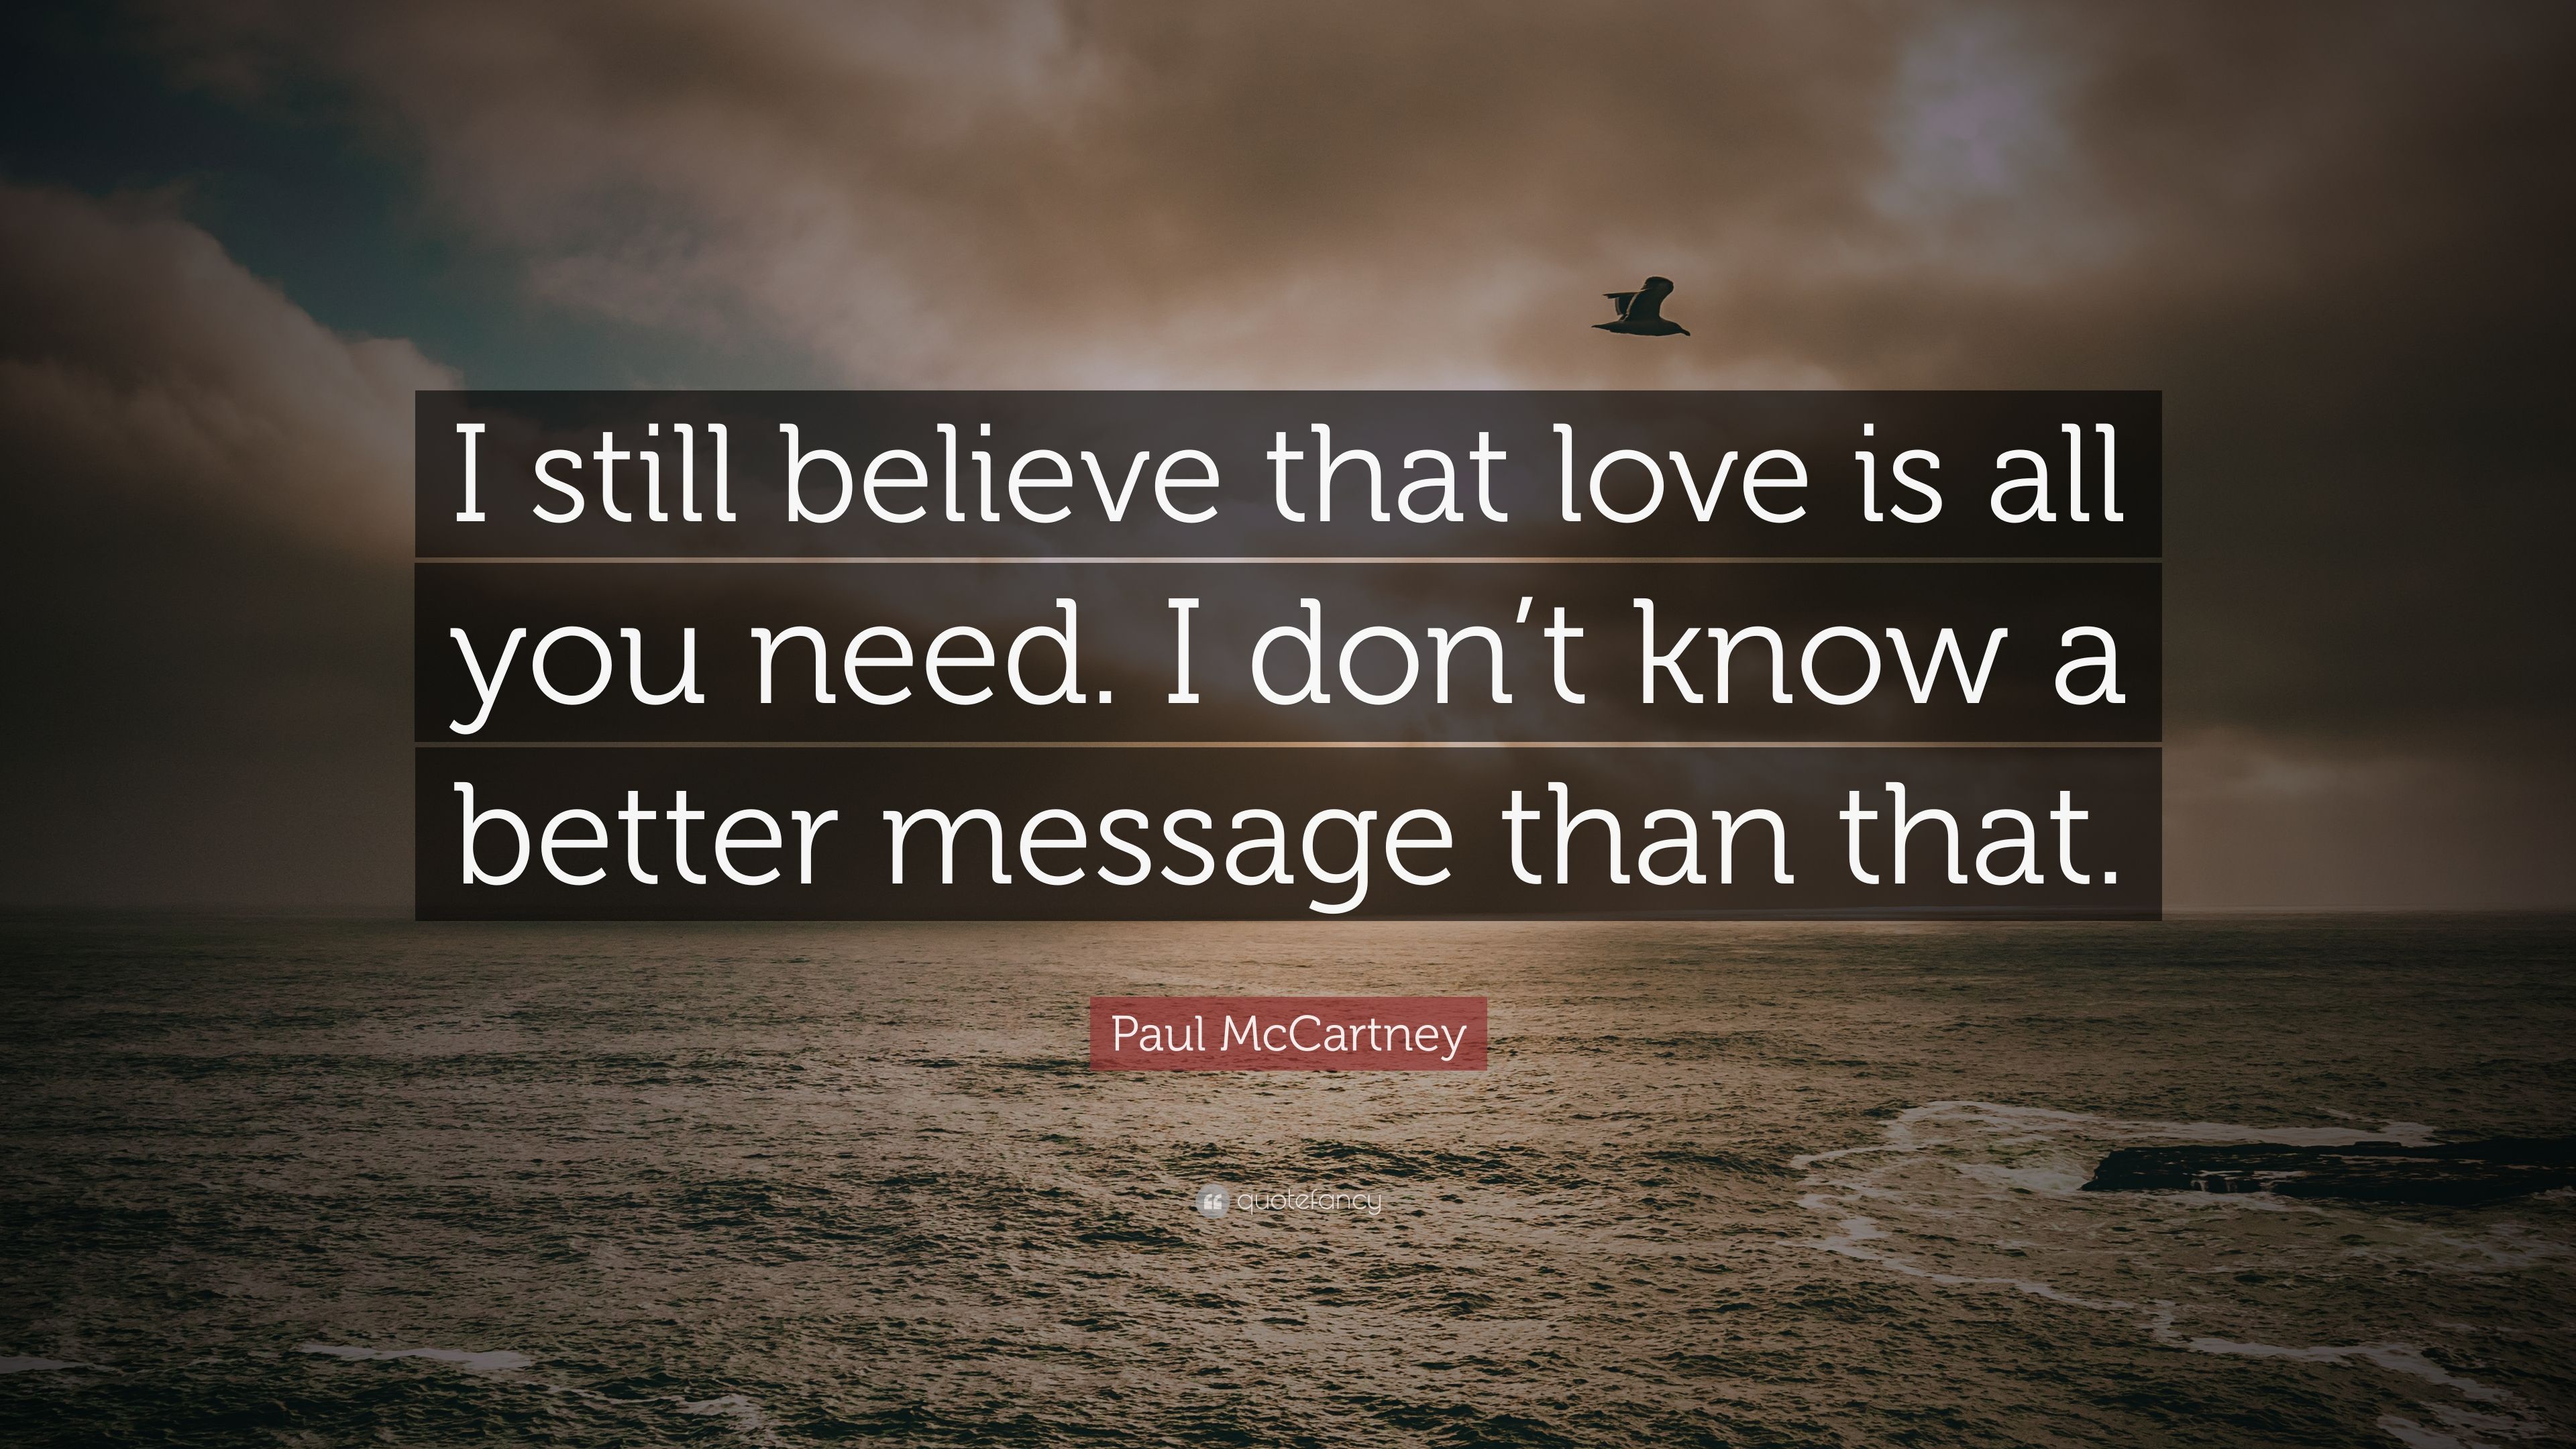 Paul McCartney Quote: “I still believe that love is all you need